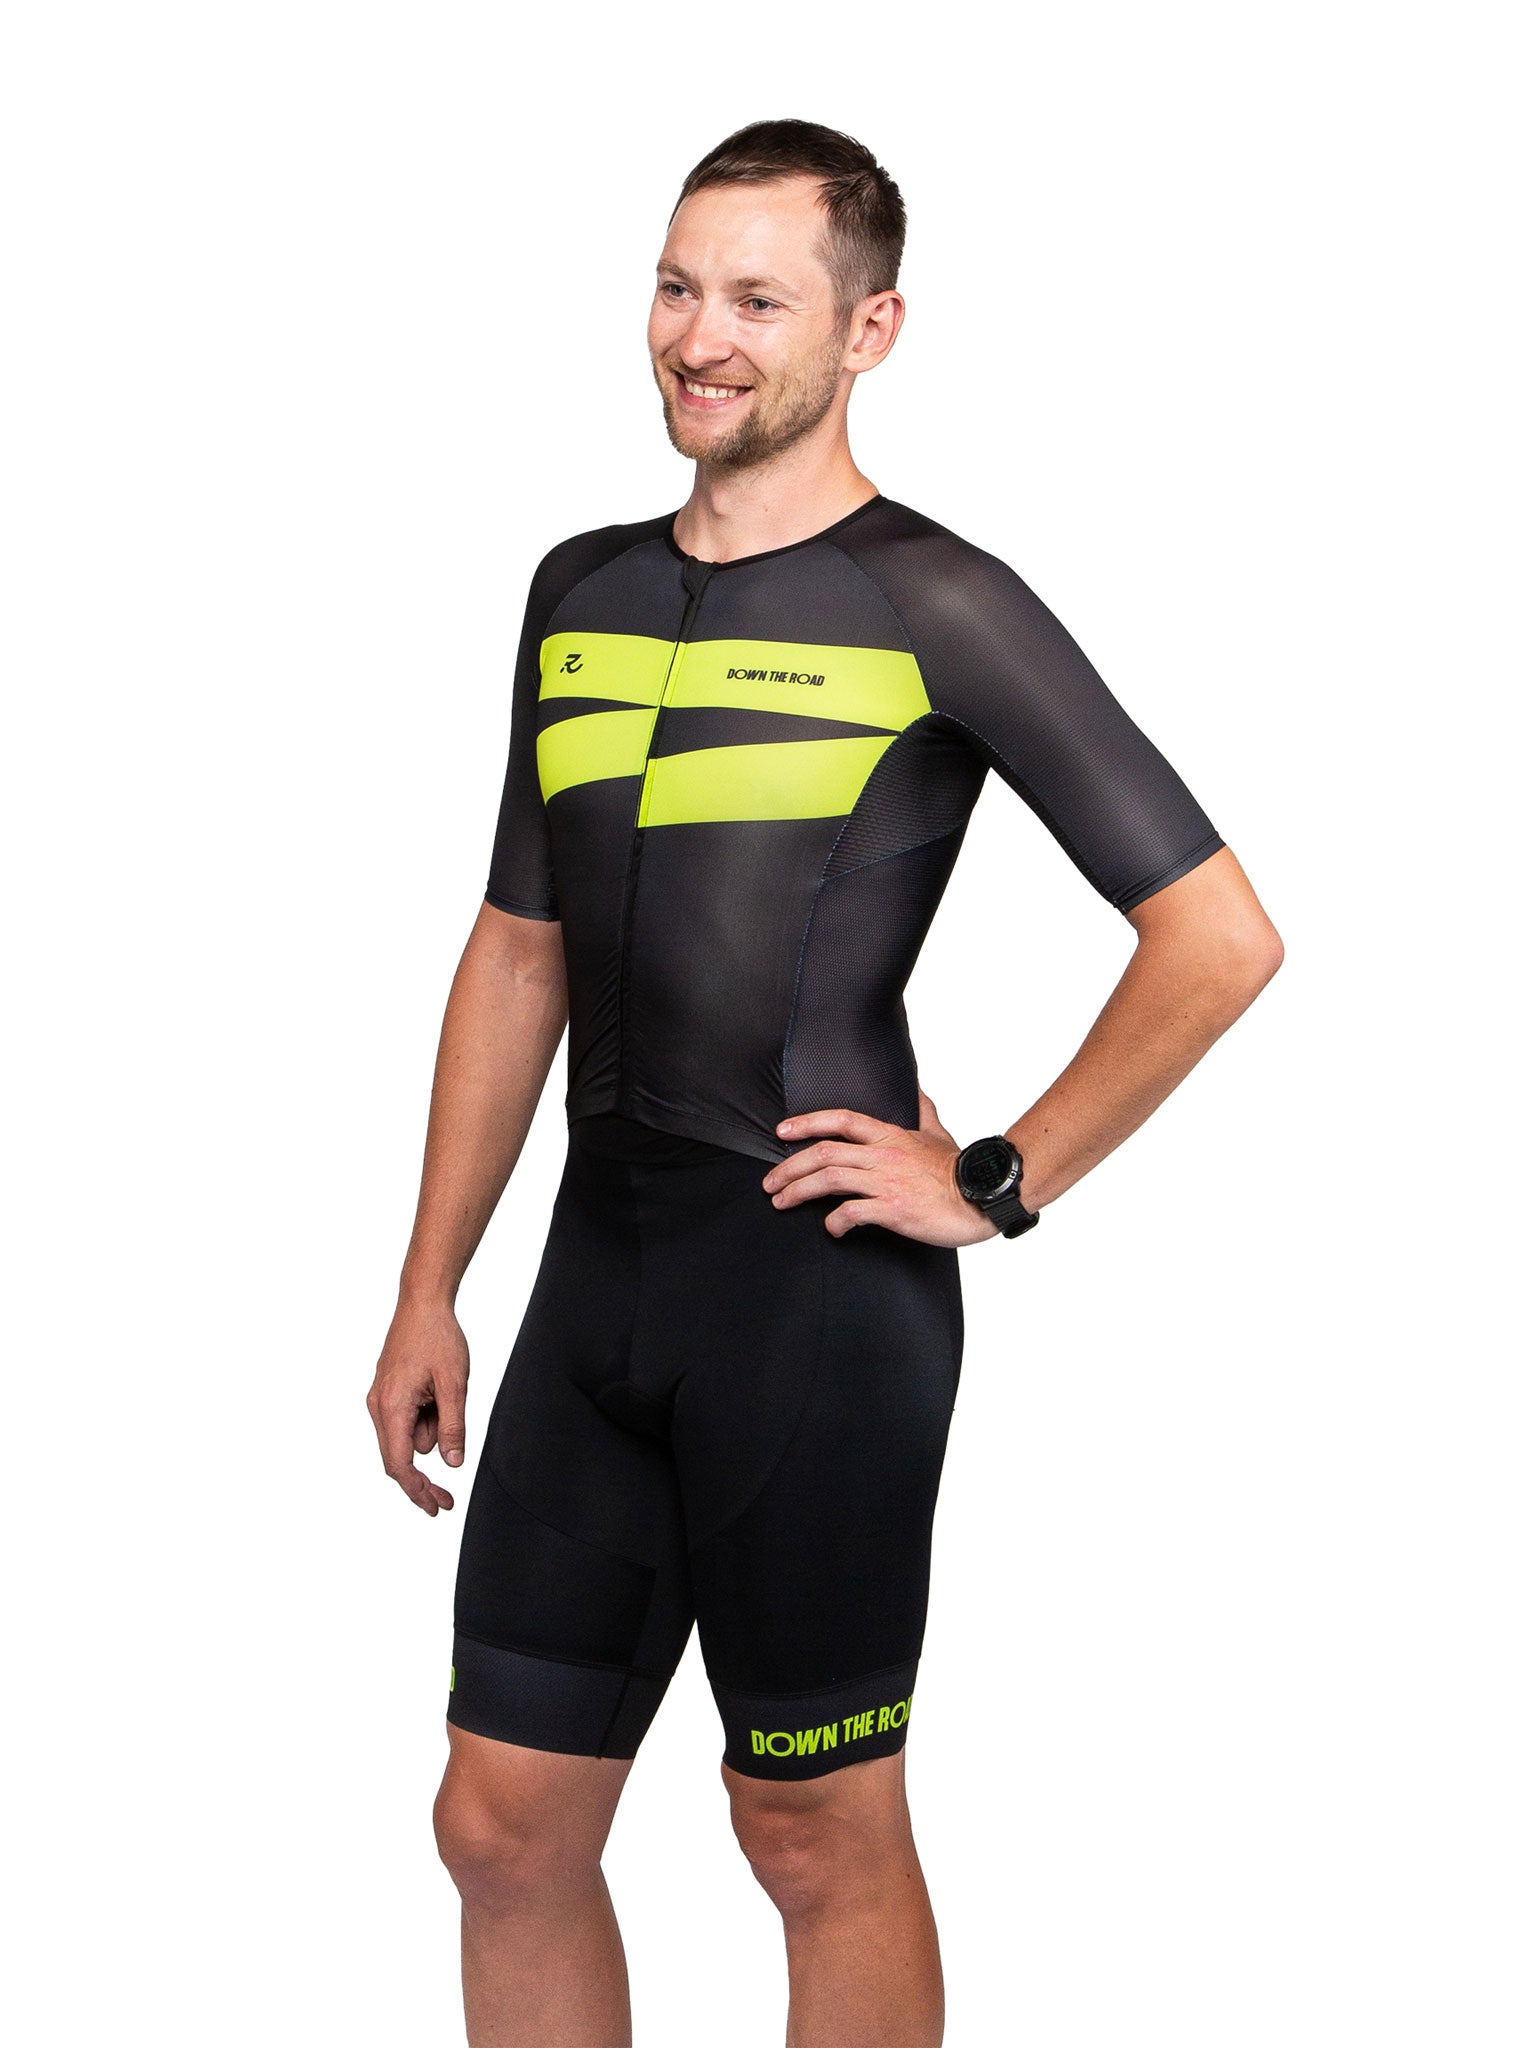 black trisuit for men with green details front side view